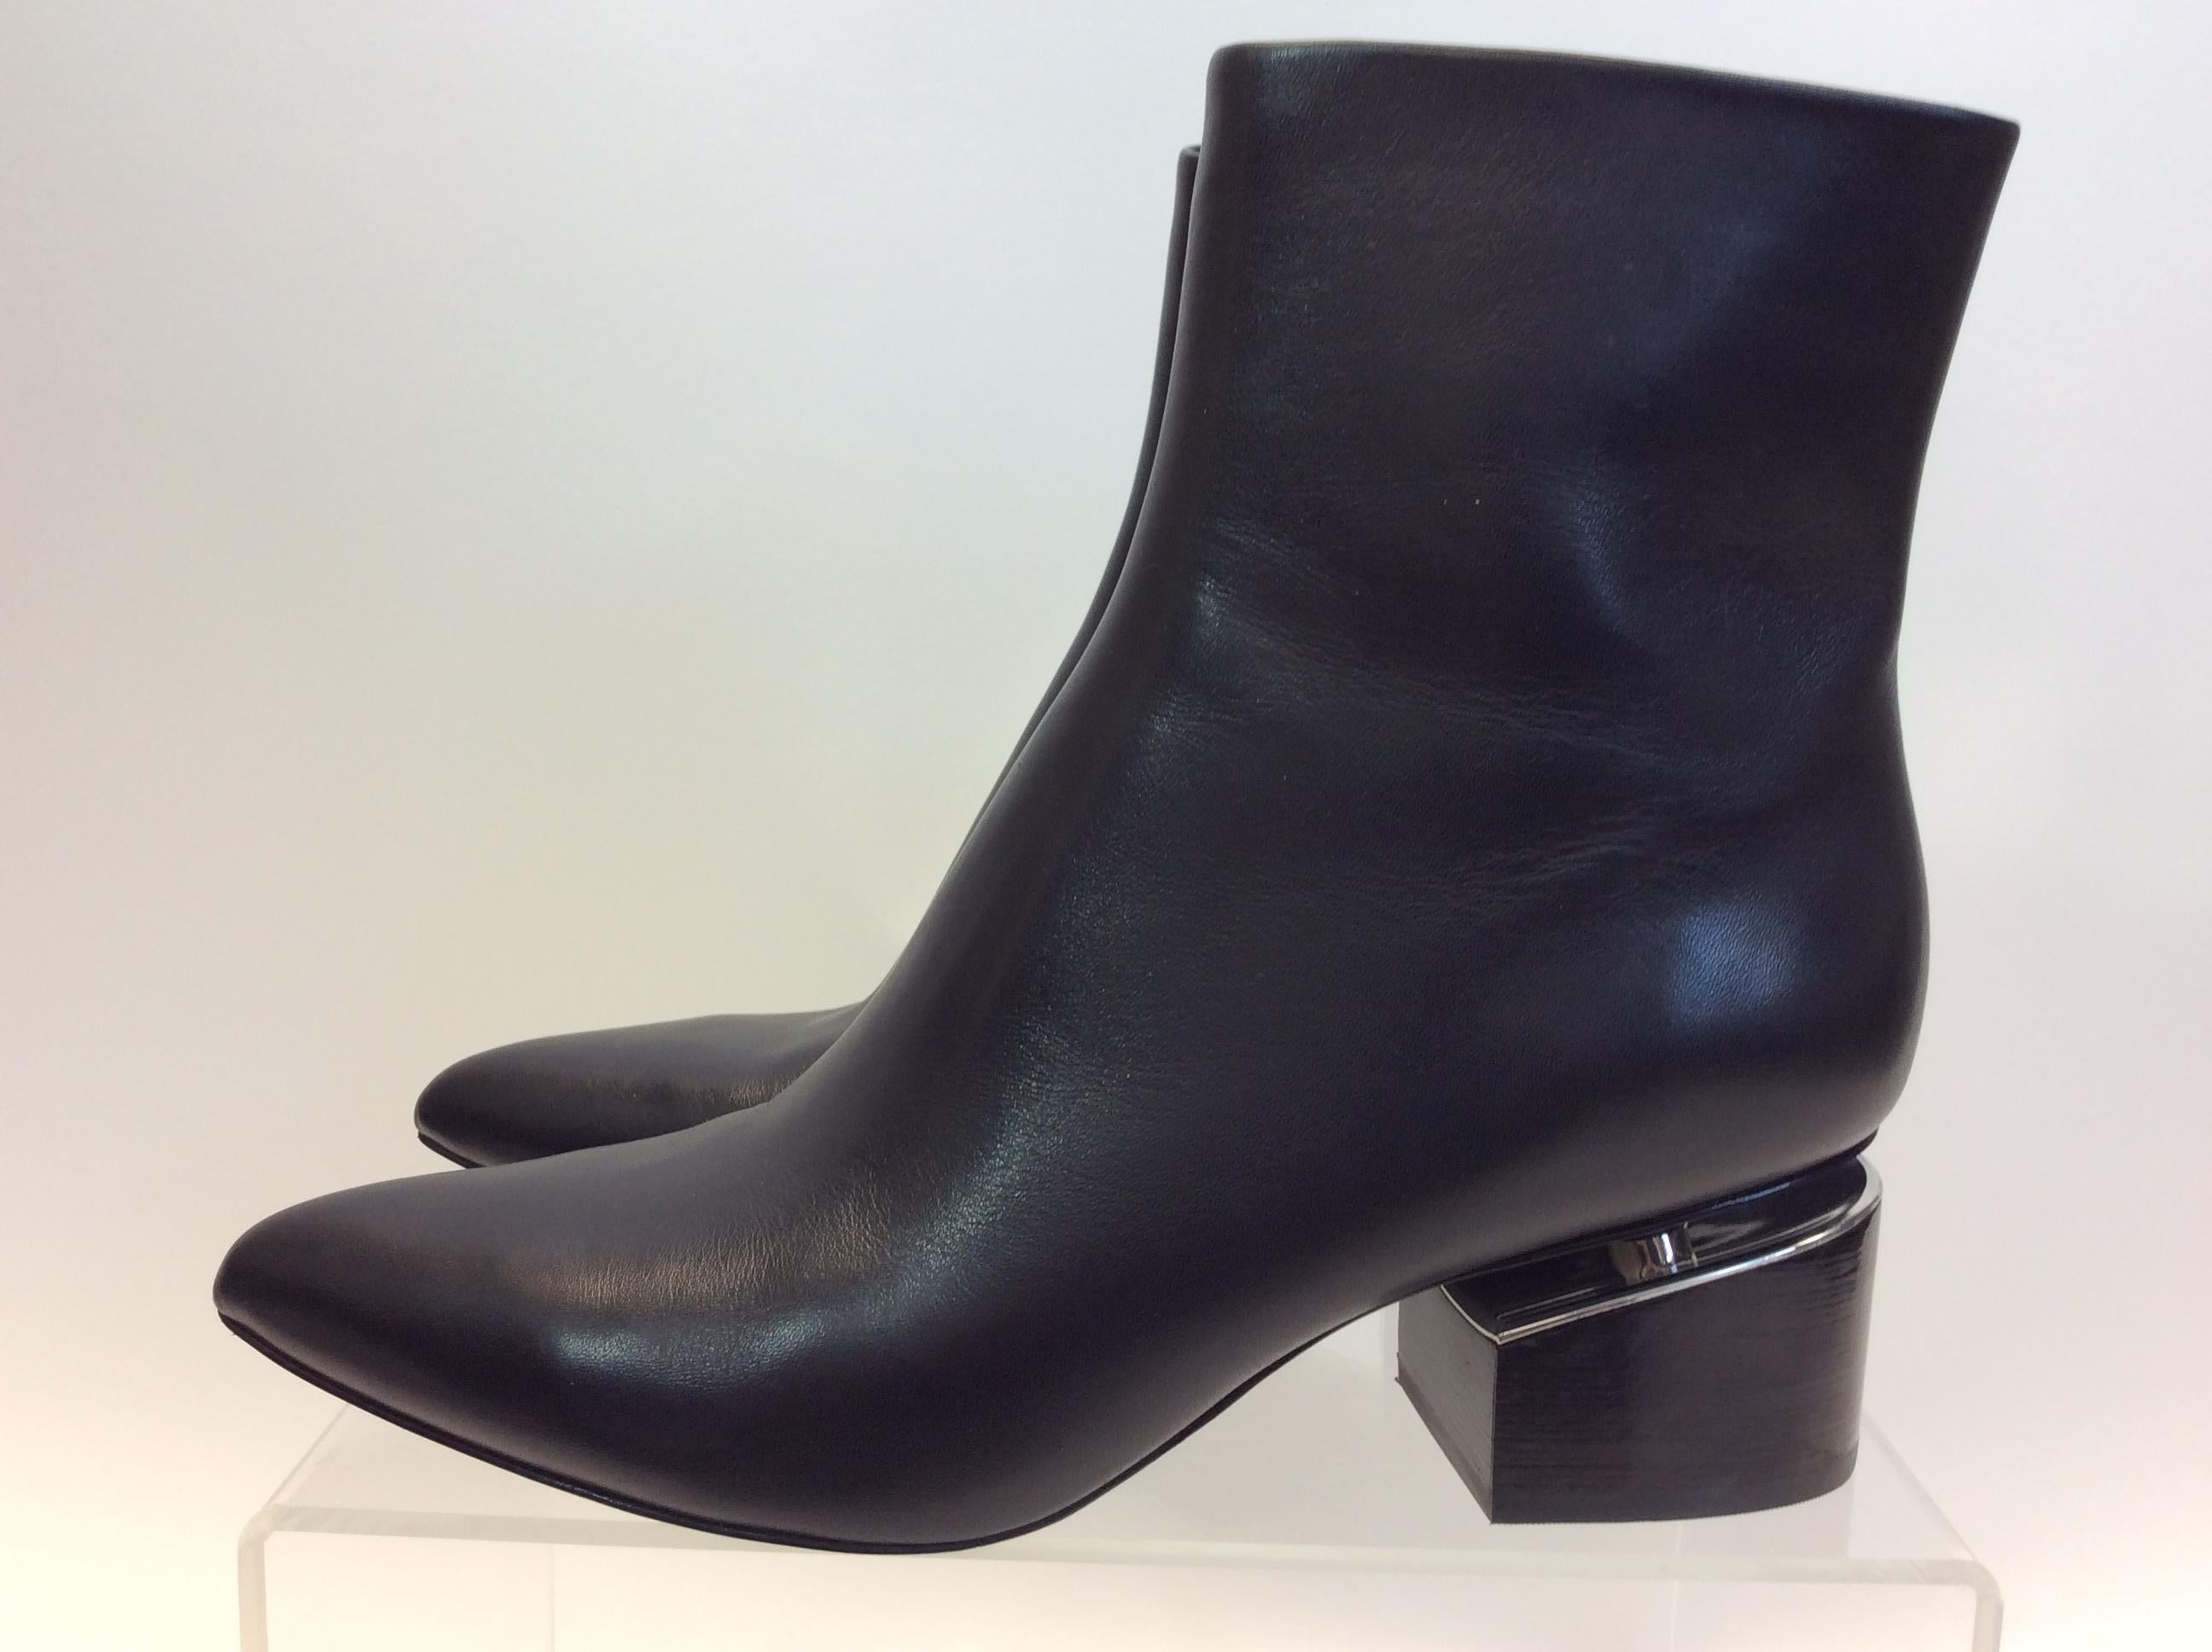 Alexander Wang Black Leather Bootie NIB
$499
Made in China
Leather
Size 37.5
2.25